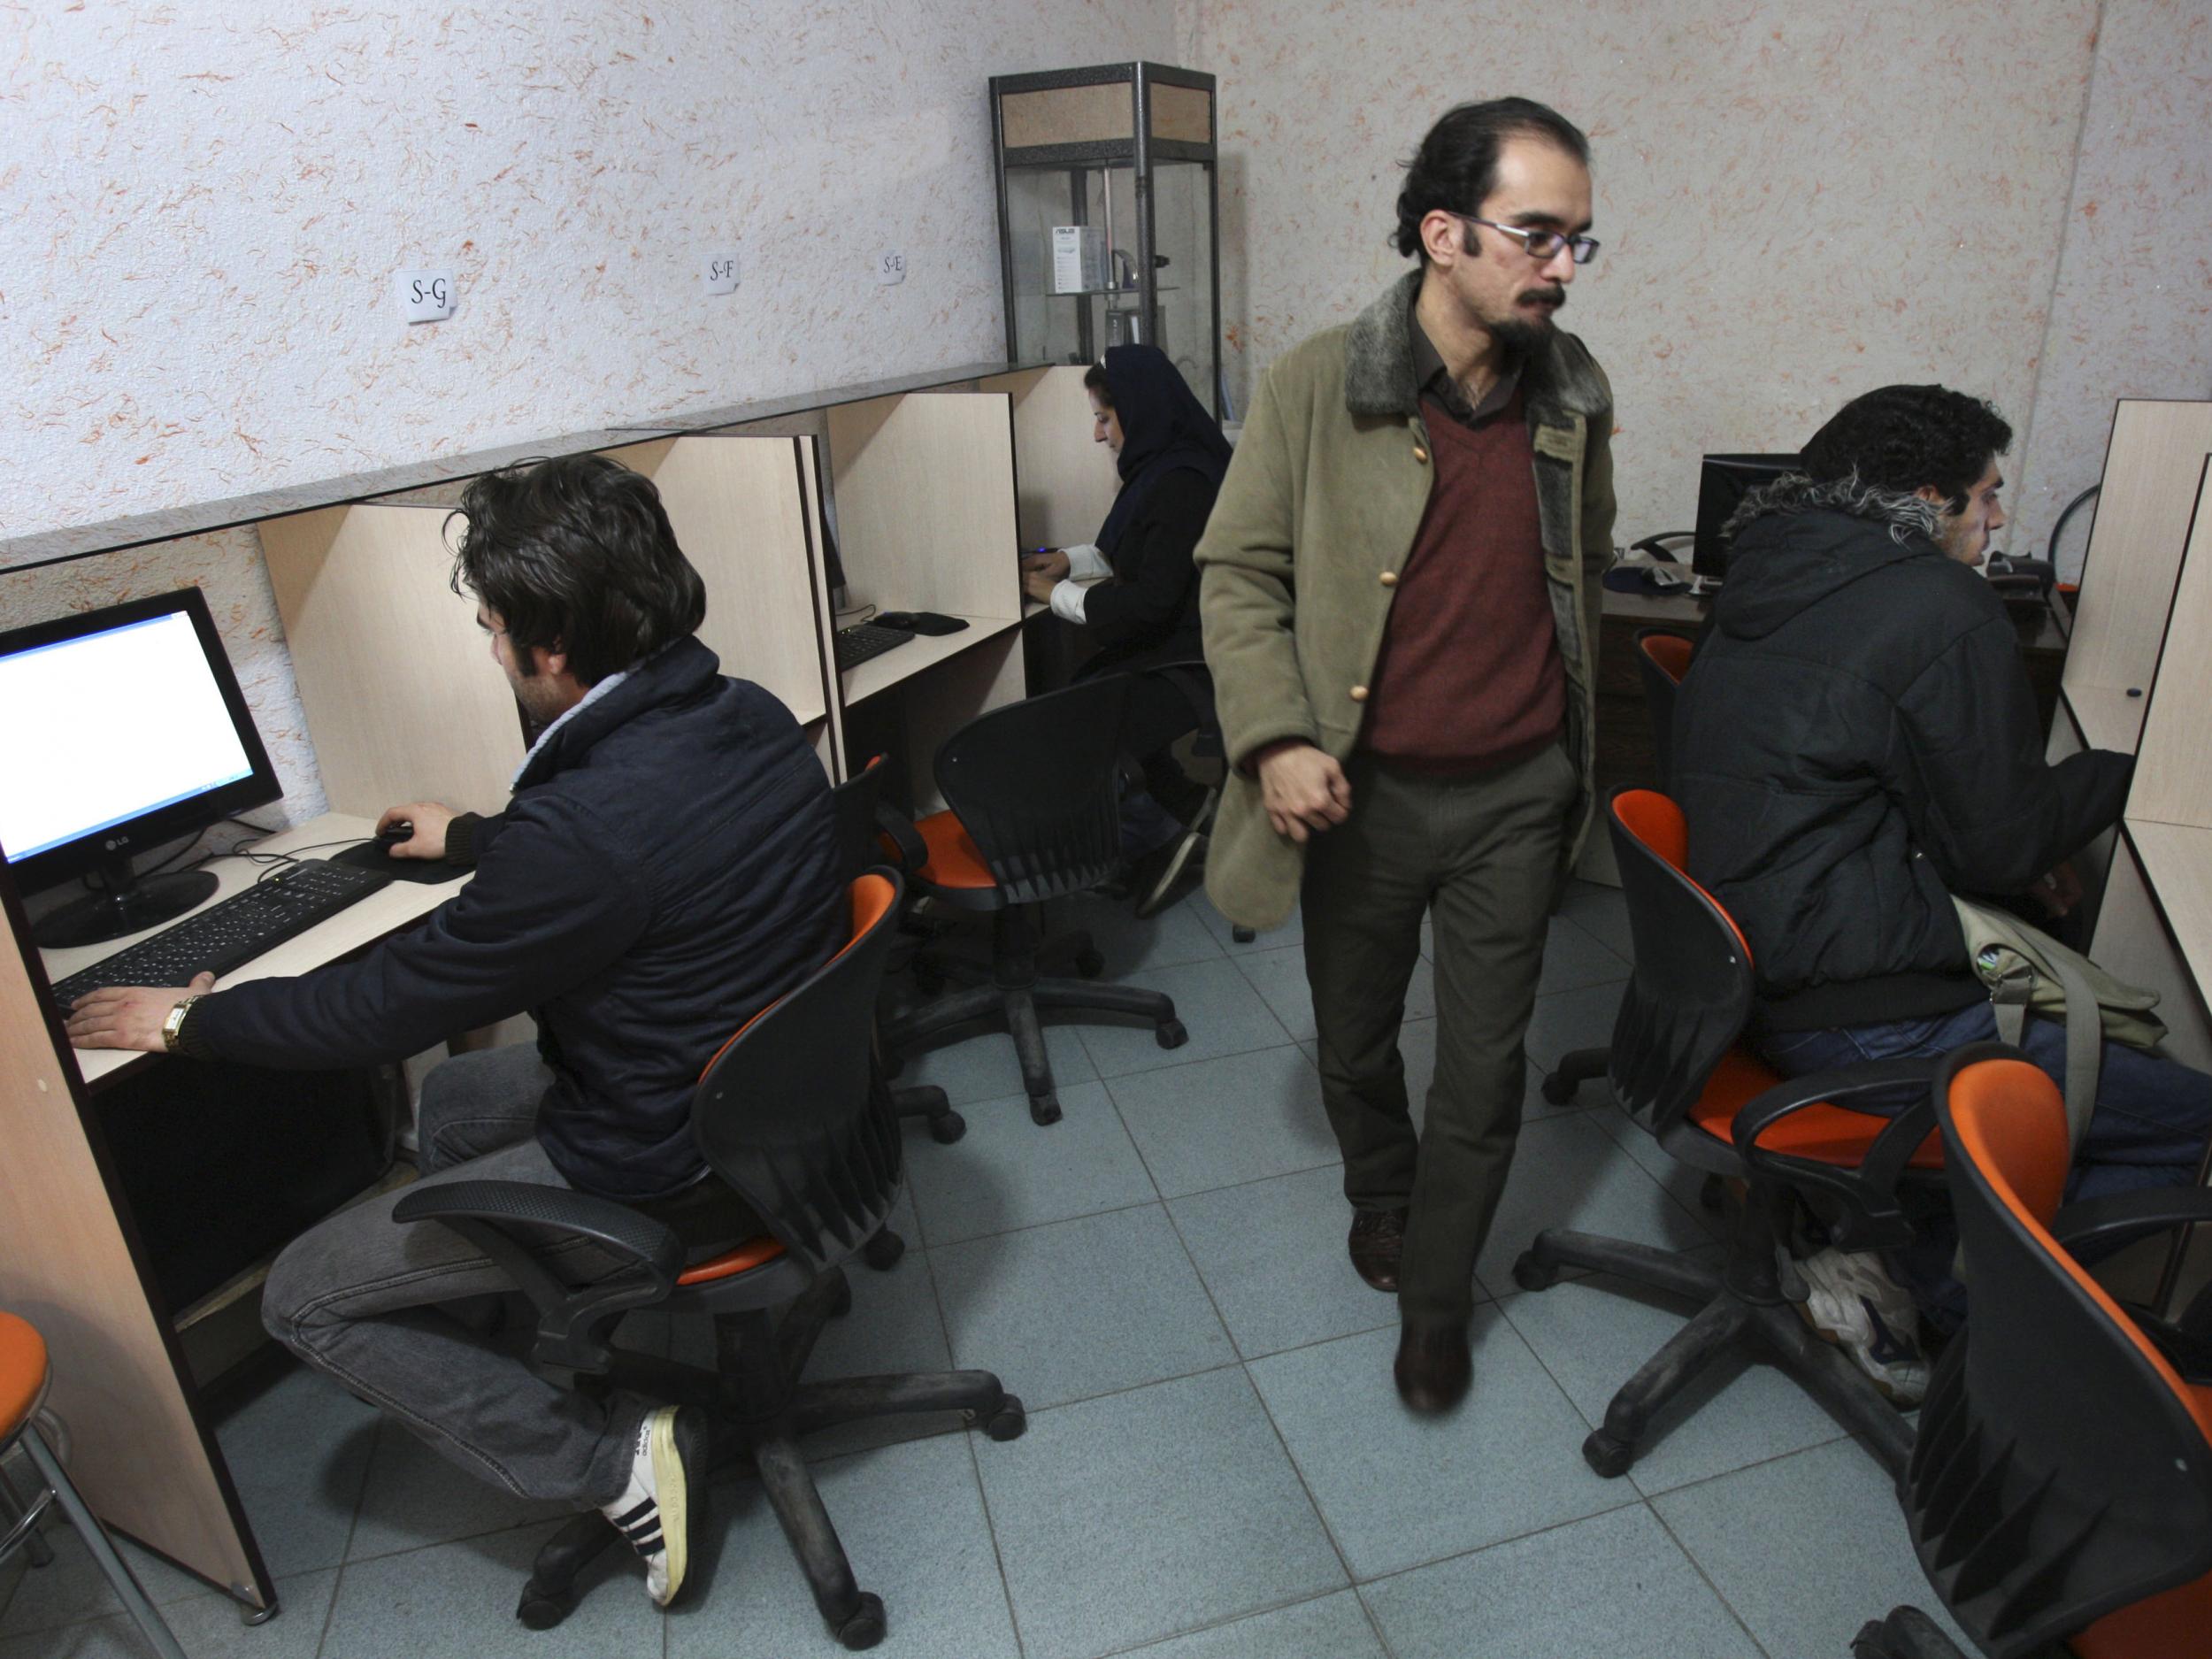 Iranians work in an internet cafe in central Tehran